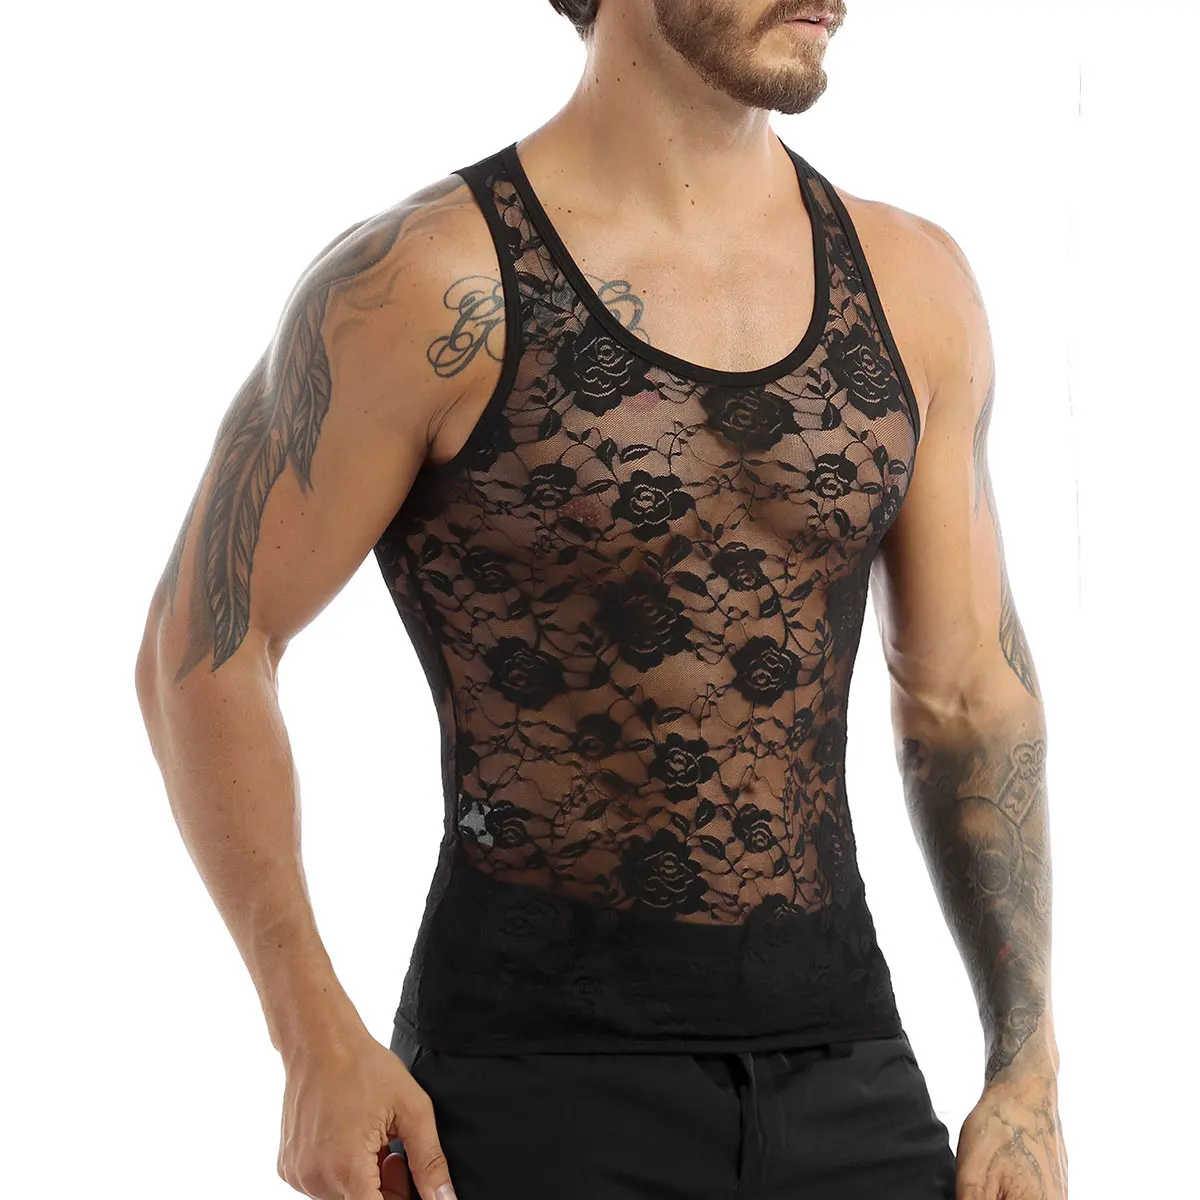 Men’s Sissy See Through Muscle Lace Sleeveless Shirts Tank Top Undershirt Vest